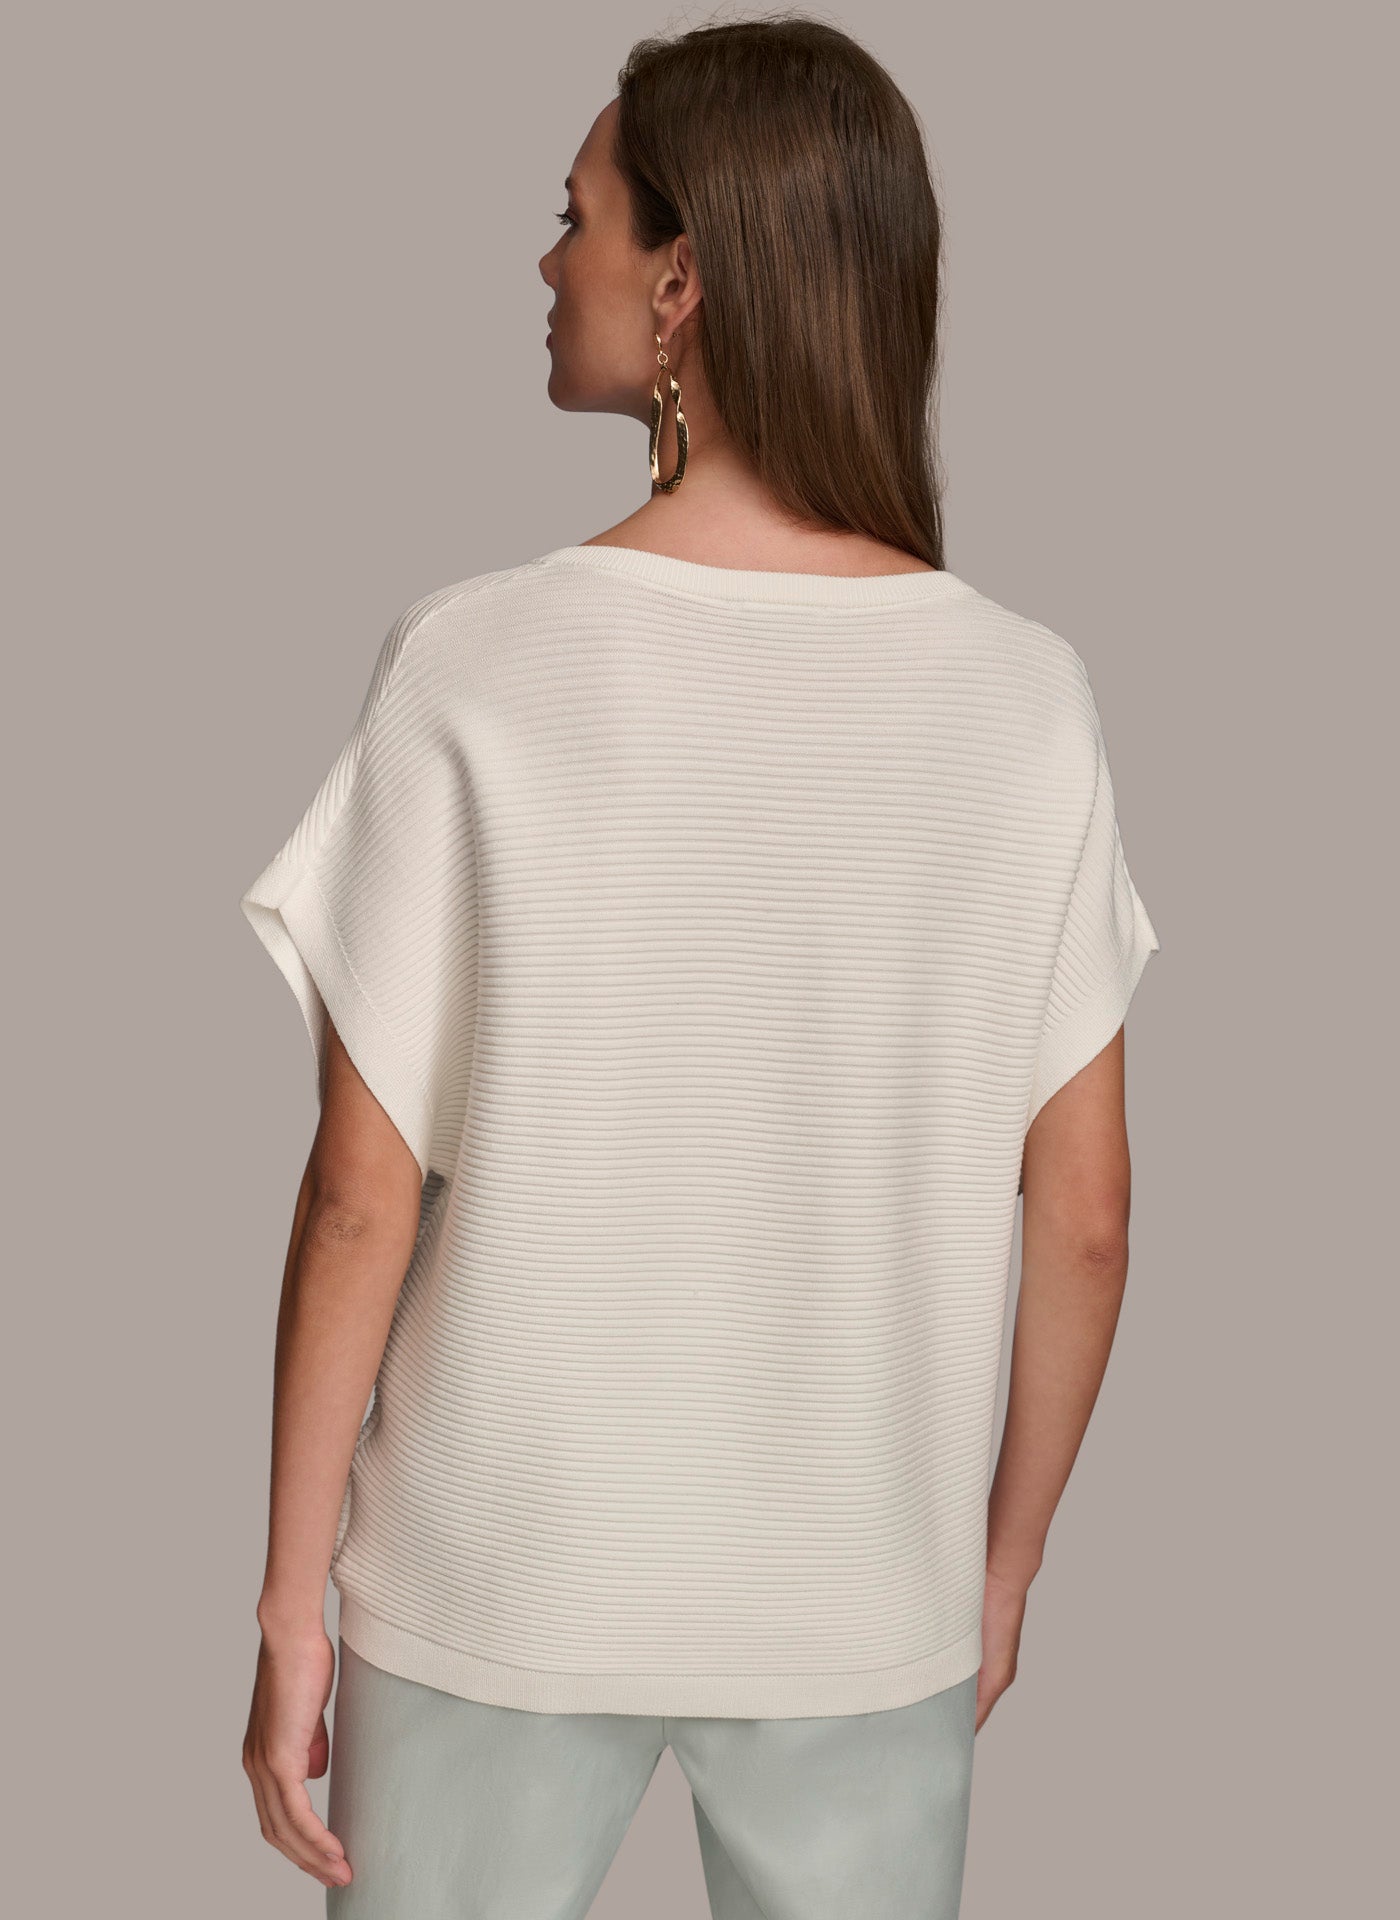 DOLMAN TOP WITH HARDWARE